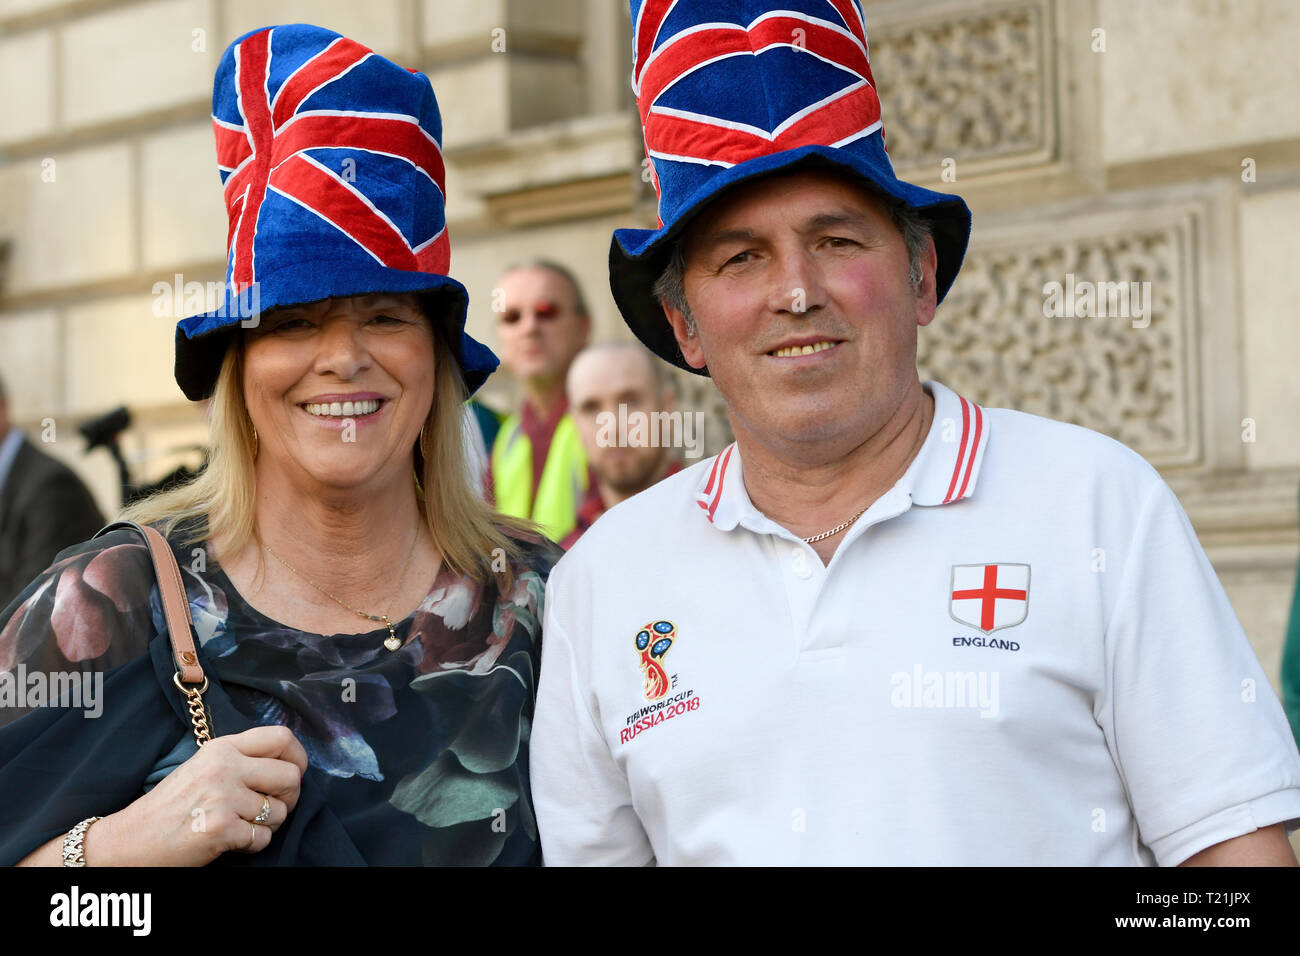 Pro Brexit supporters seen wearing blue hats with red stripes emulating the United Kingdom flag during the Leave means leave rally in London.  A Leave means leave pro Brexit march begun on March 16 in Sunderland, UK and ended with a rally in Parliament Square on March 29 in London, same day that UK has been scheduled to leave the European Union. Pro Brexit protesters gathered at Parliament Square to demand from the government to deliver what was promised and leave the European Union without a deal. Nigel Farage and Tommy Robinson were seen giving speeches to their supporters in different stage Stock Photo